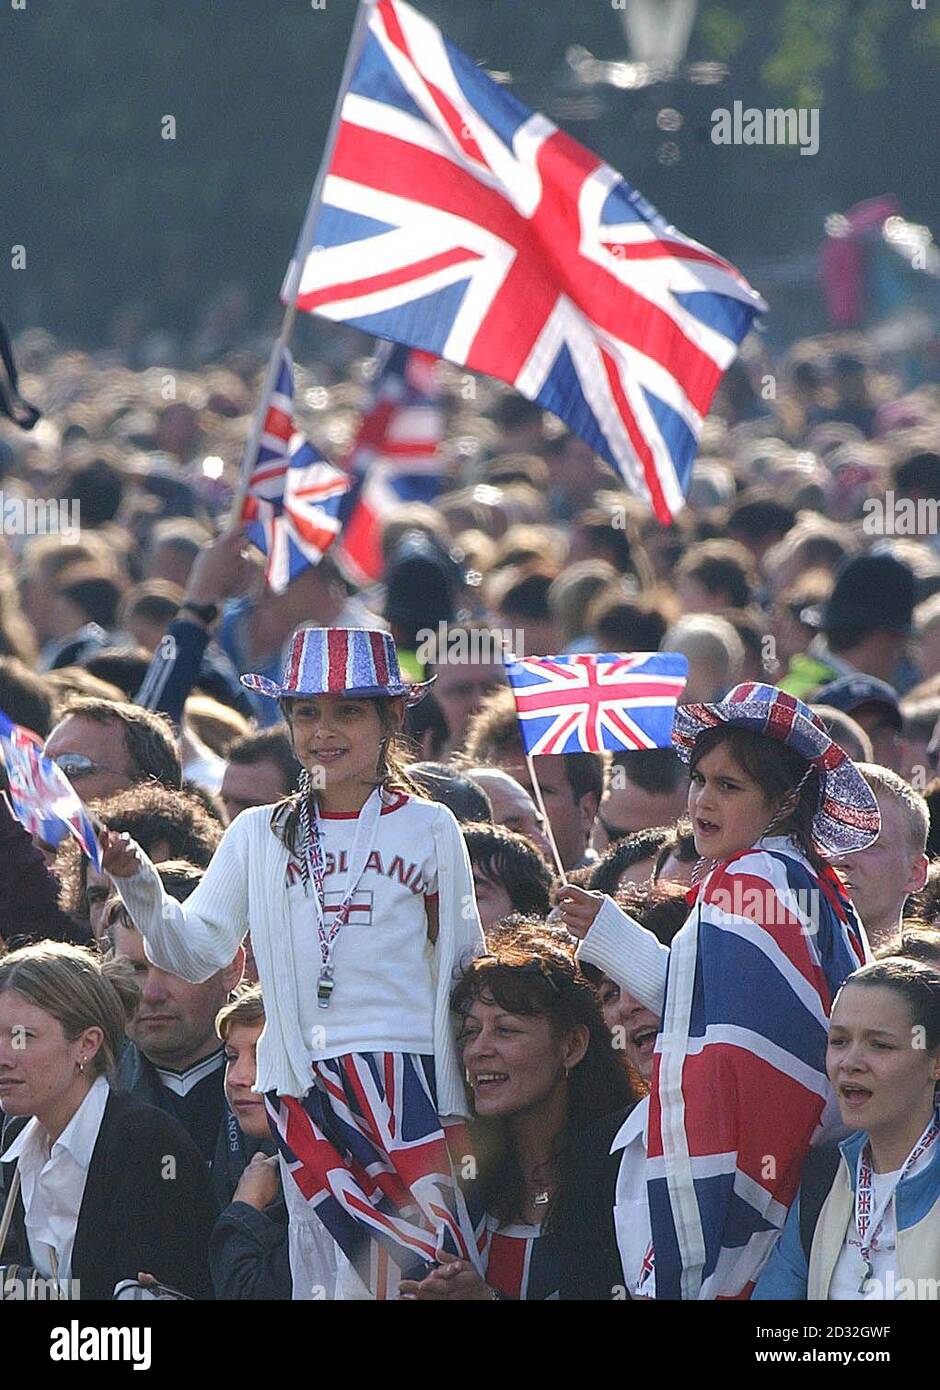 Squeezing in, crowds take every vantage point around Buckingham Palace, for the Pop Concert to celebrate the Golden Jubilee of the Queen.  The Jubilee spectacular will be kicked off with Queen guitarist Brian May performing the National Anthem from the roof.  *   of the Palace. Stock Photo